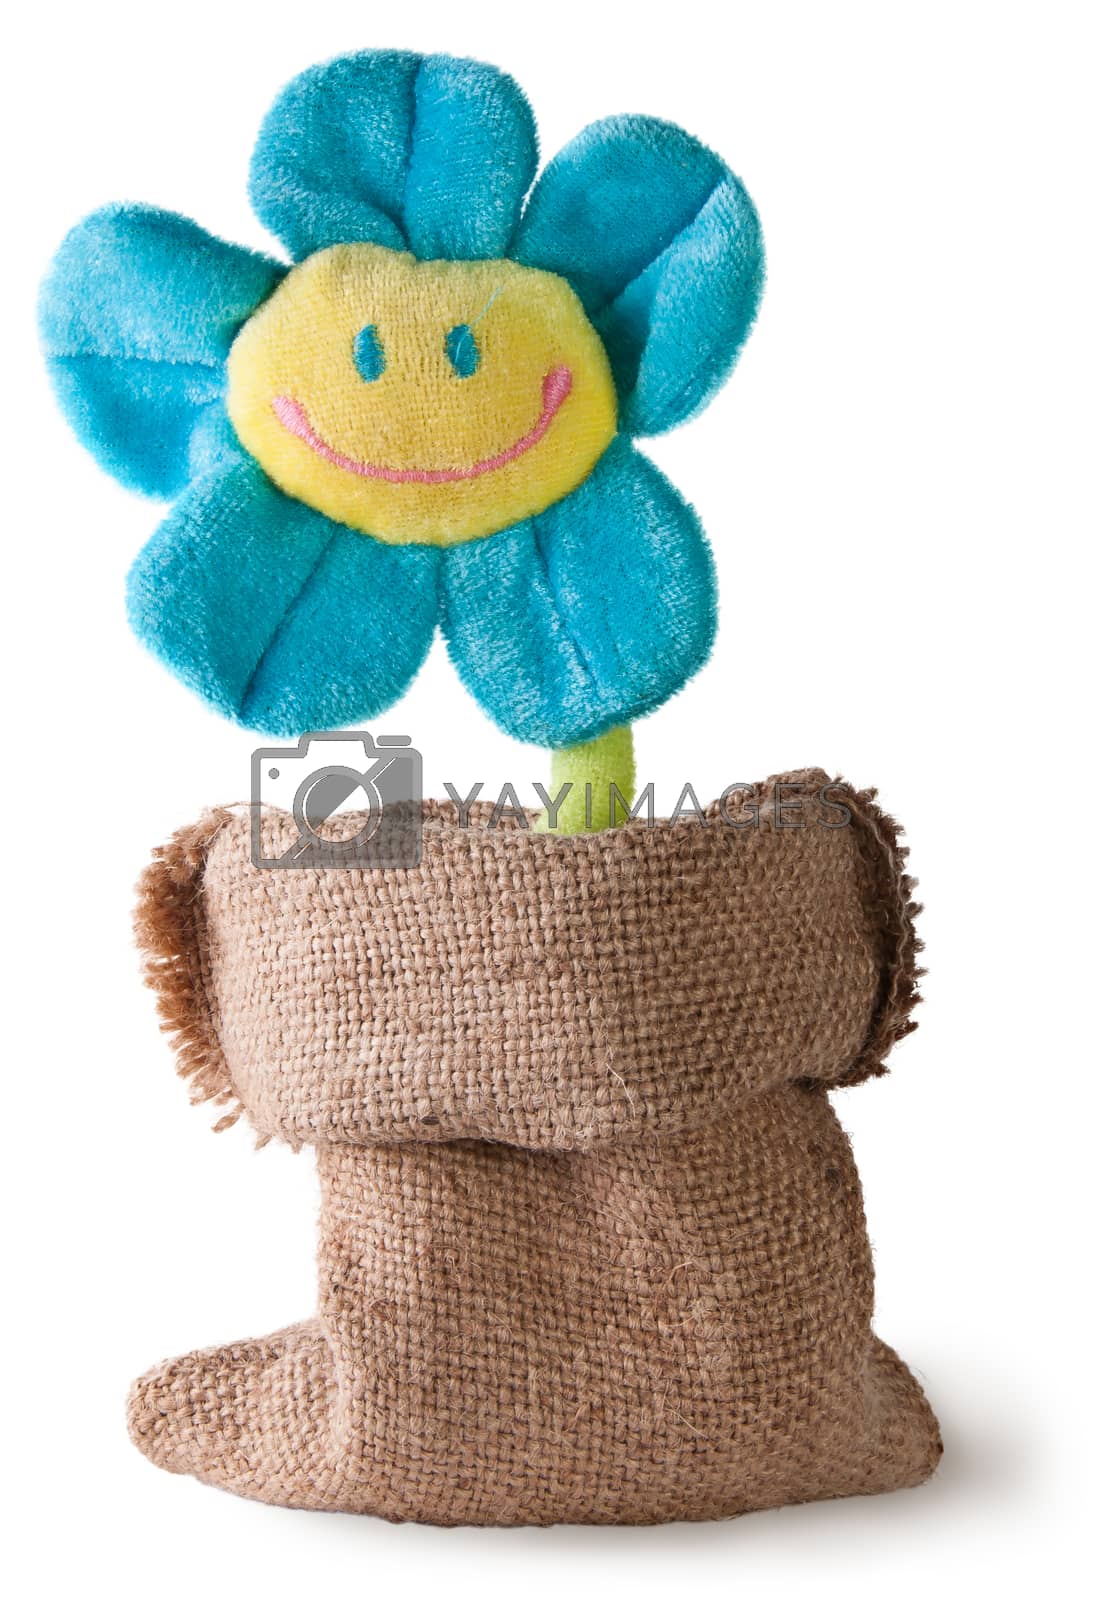 Royalty free image of Plush flower in sack by Cipariss